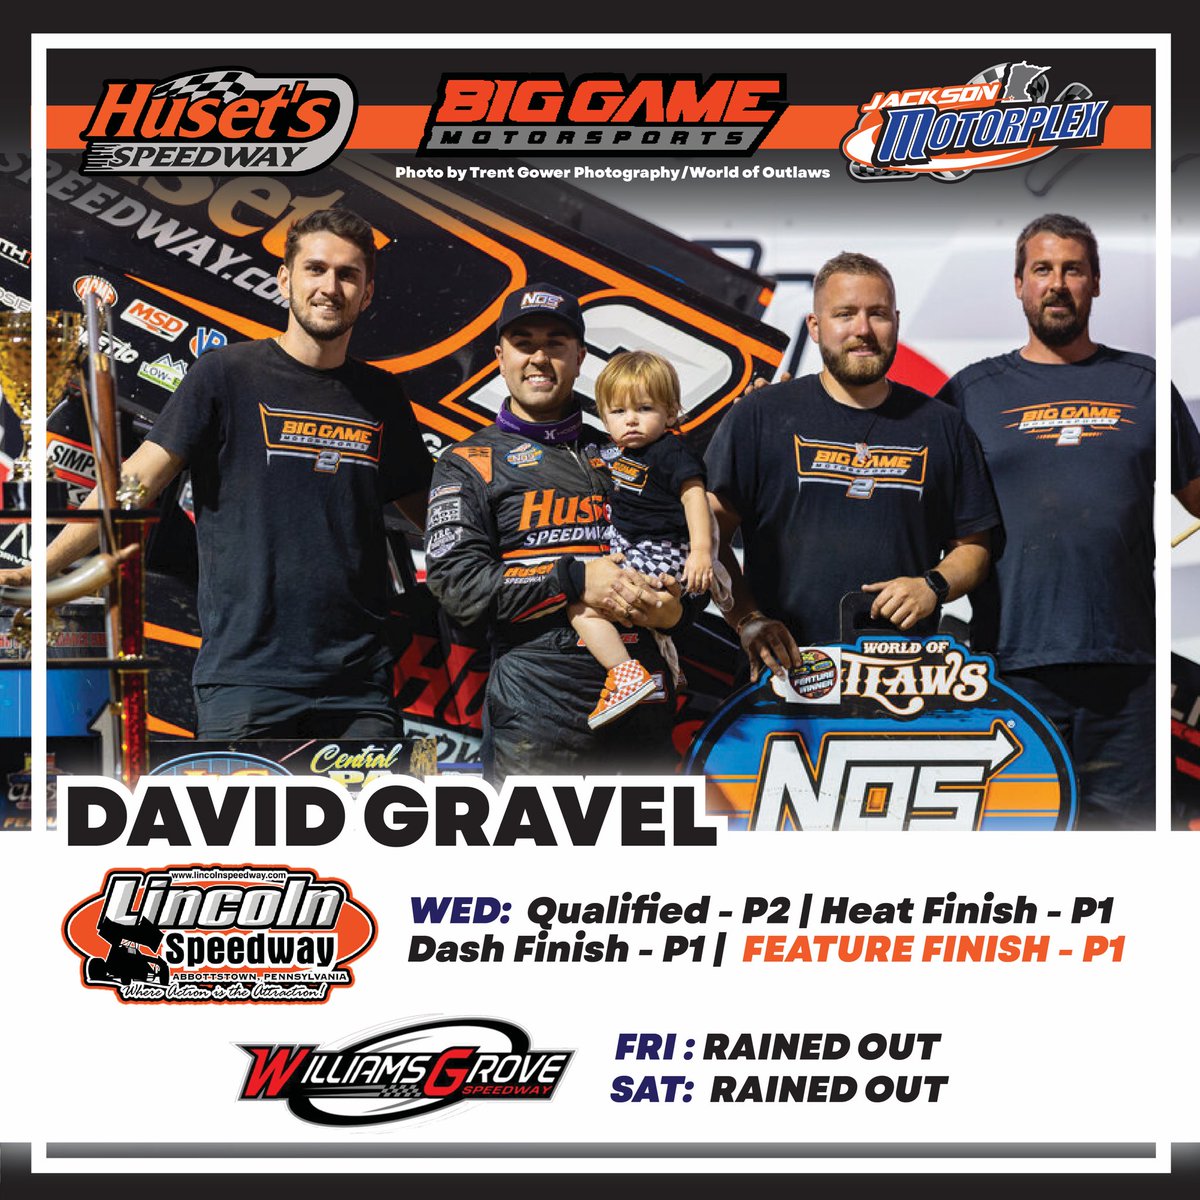 Although the weekend races rained out, it was a winning week for @DavidGravel as he led @BigGameMotorspt to its 100th career @WorldofOutlaws victory! #TeamILP